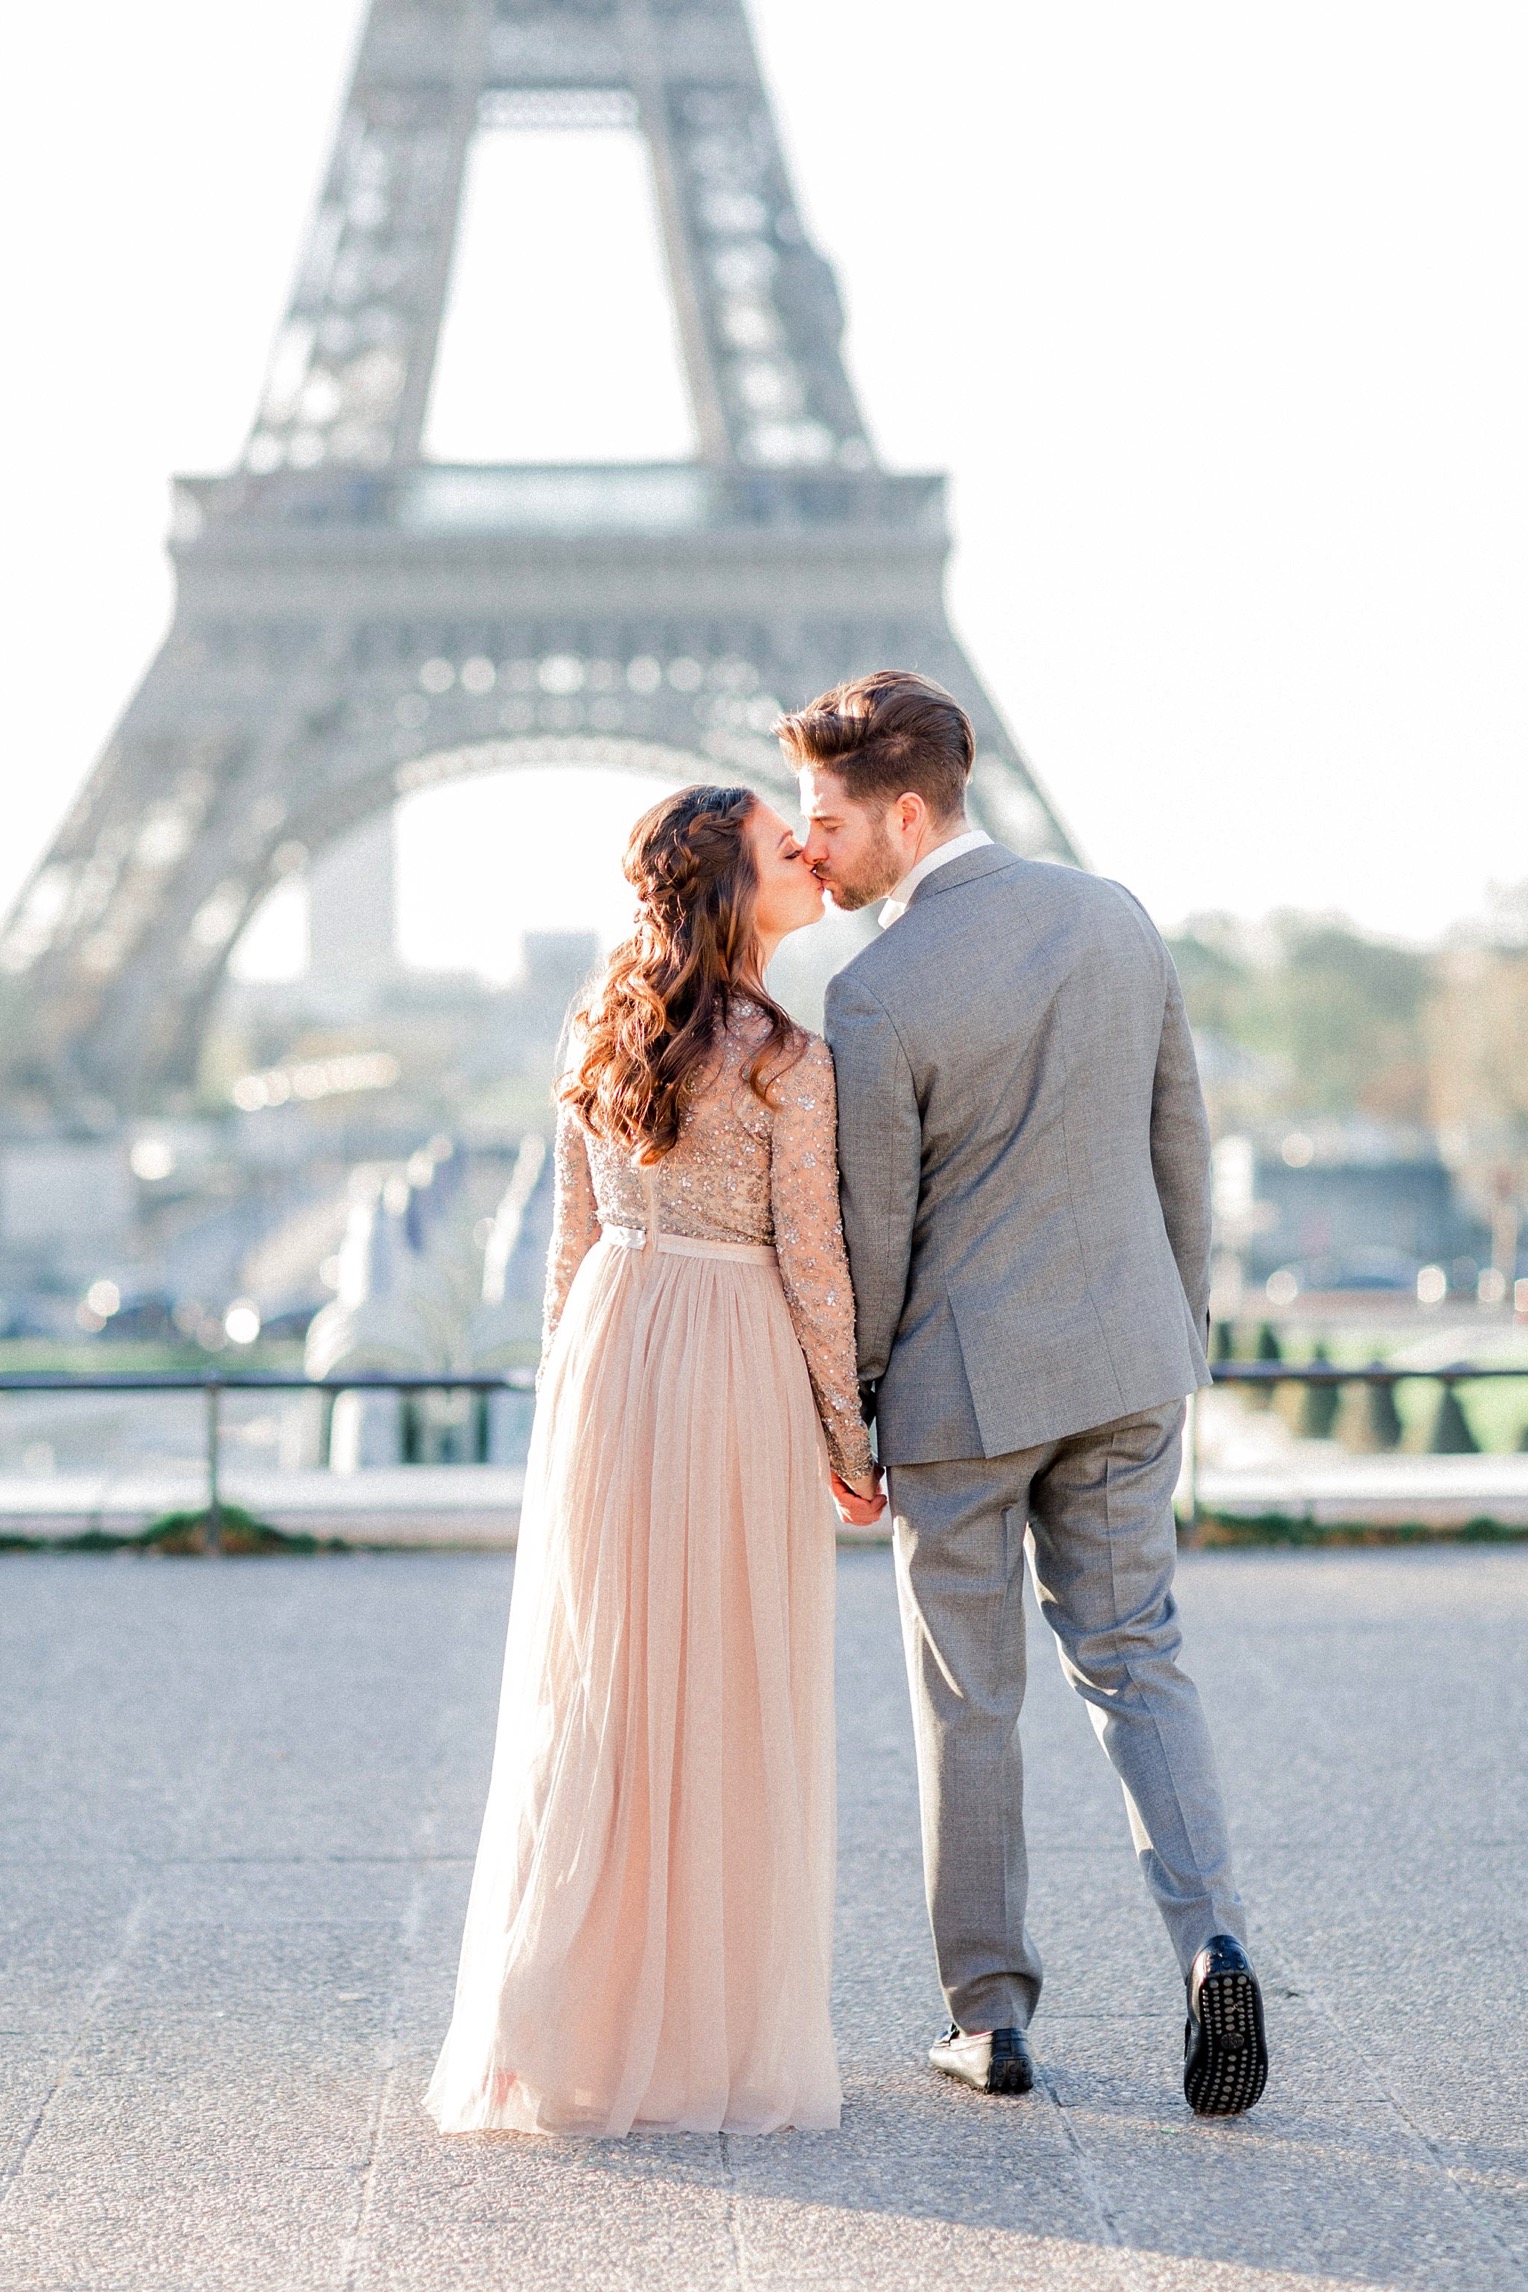 A paris photography session | French Grey Photography